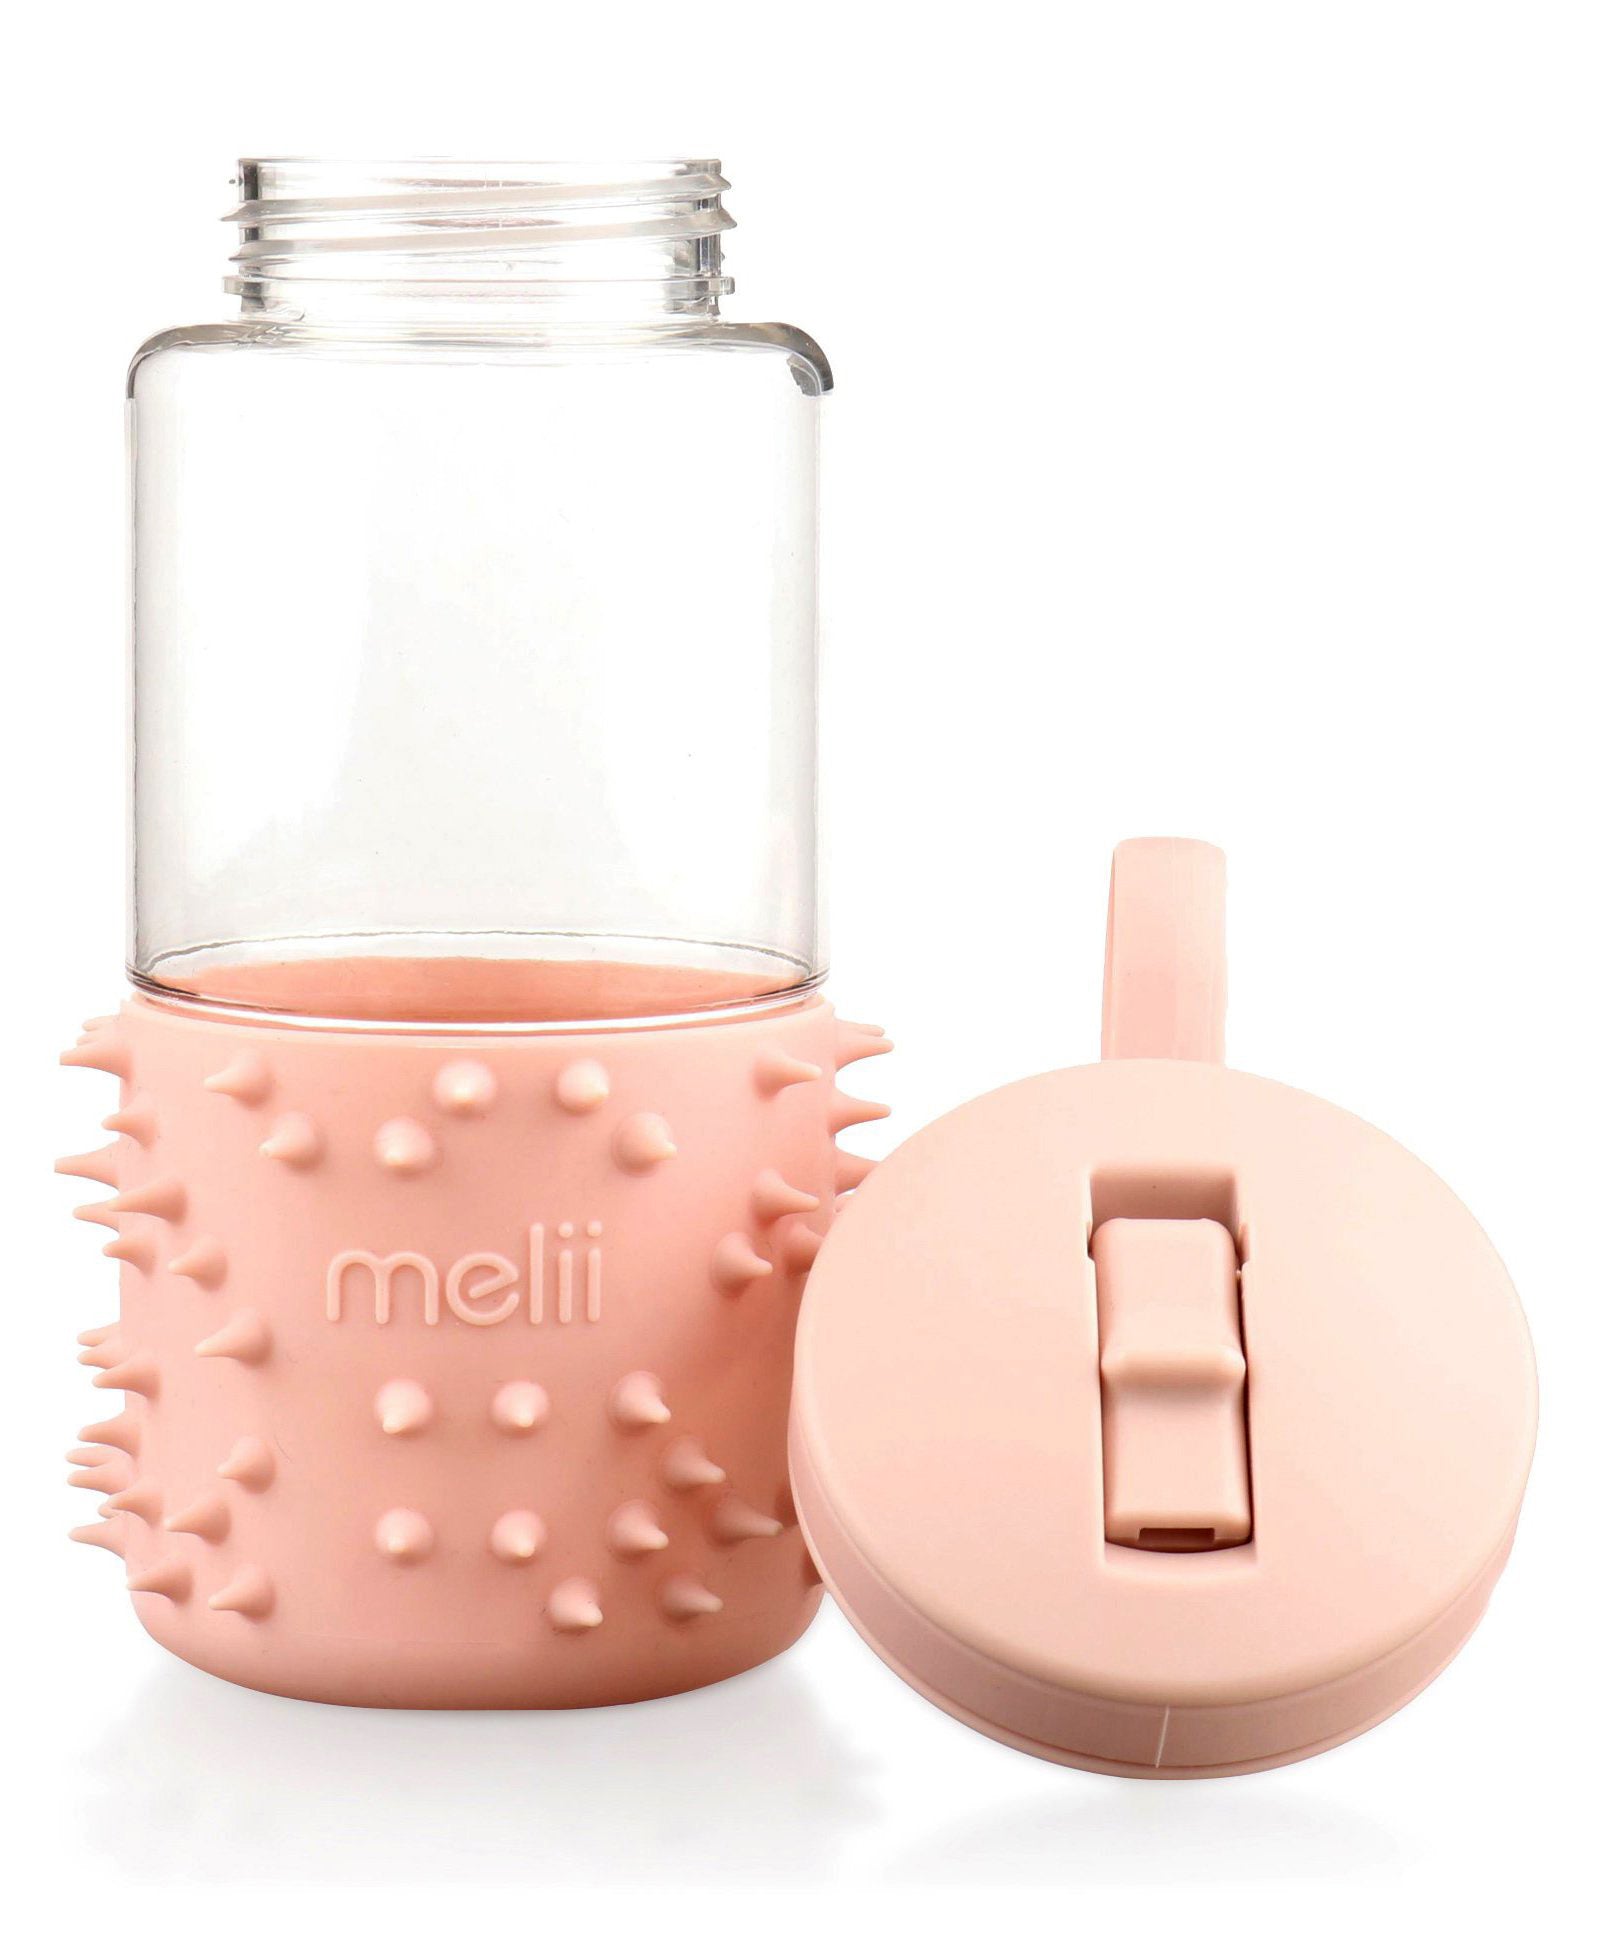 melii-spikey-water-bottle-17-oz-coral